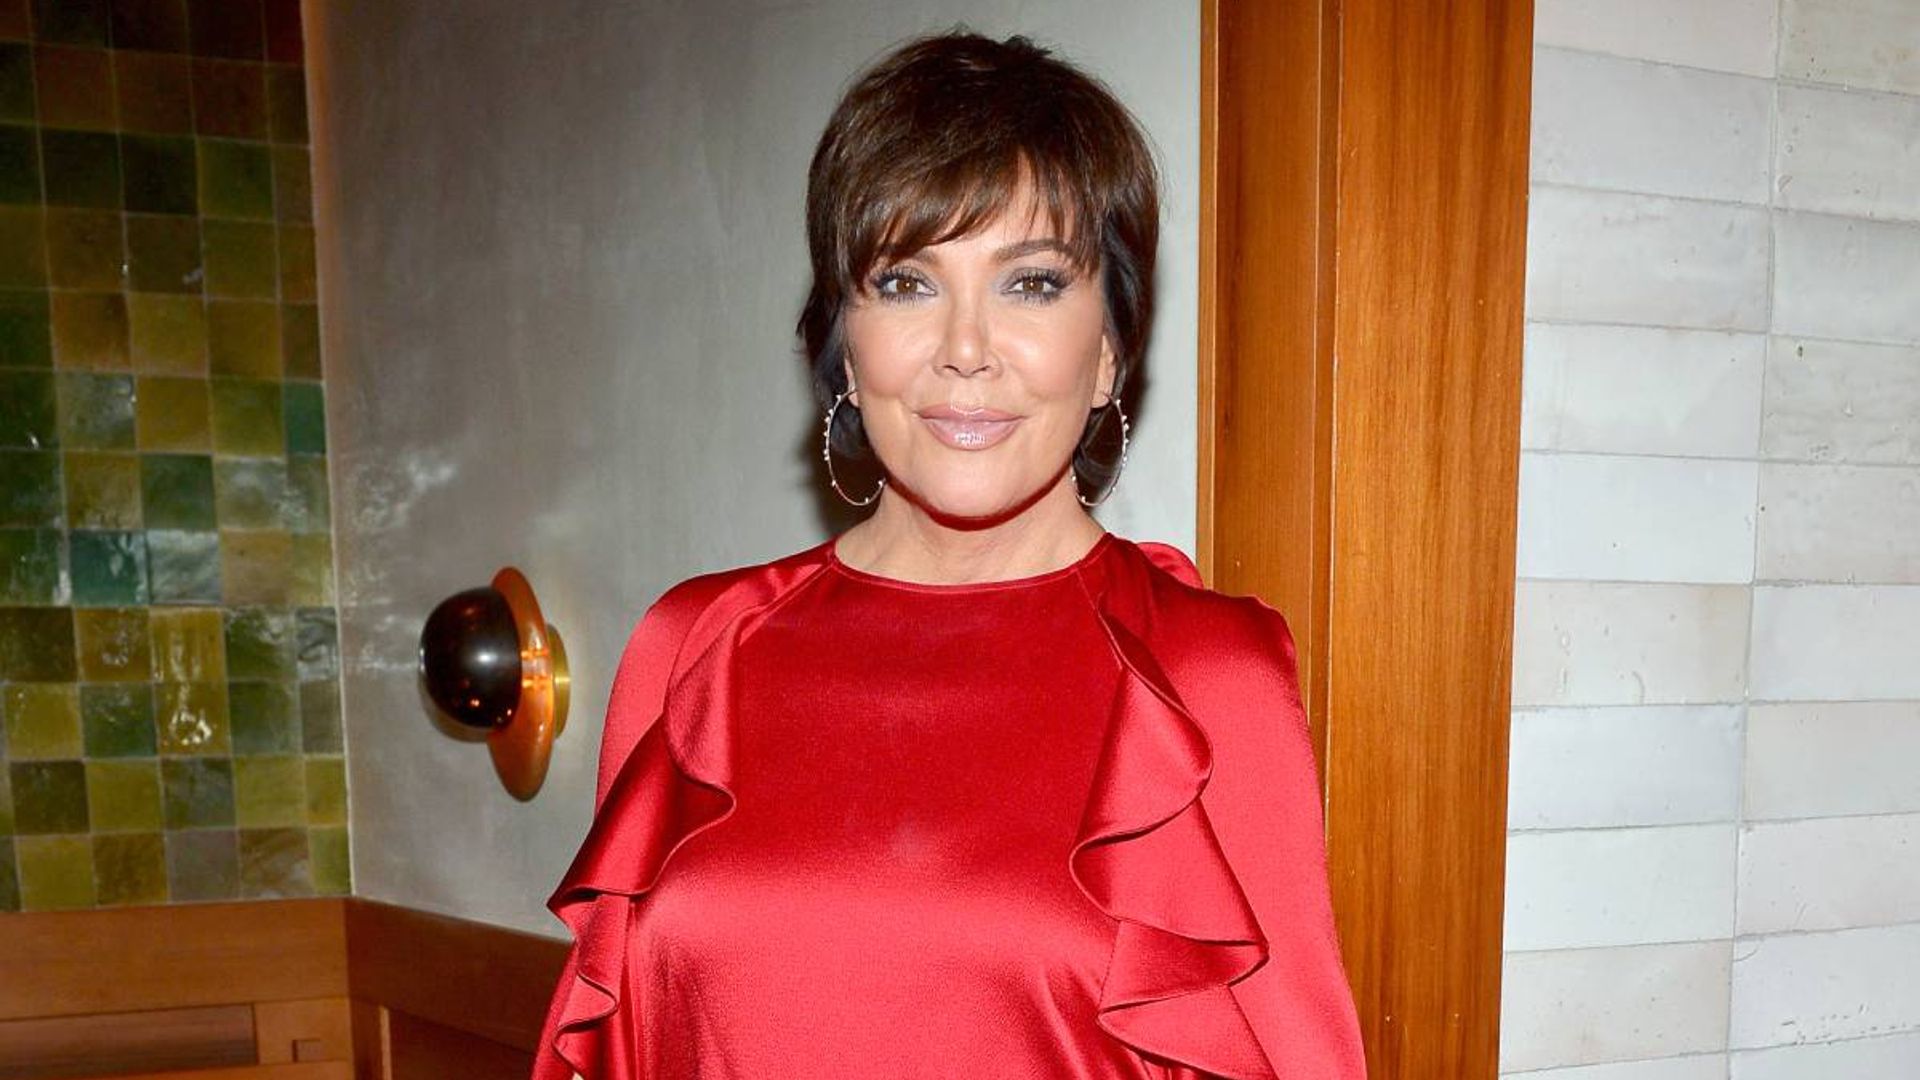 Kris Jenner shares glimpse inside quirky kitchen as she makes important announcement